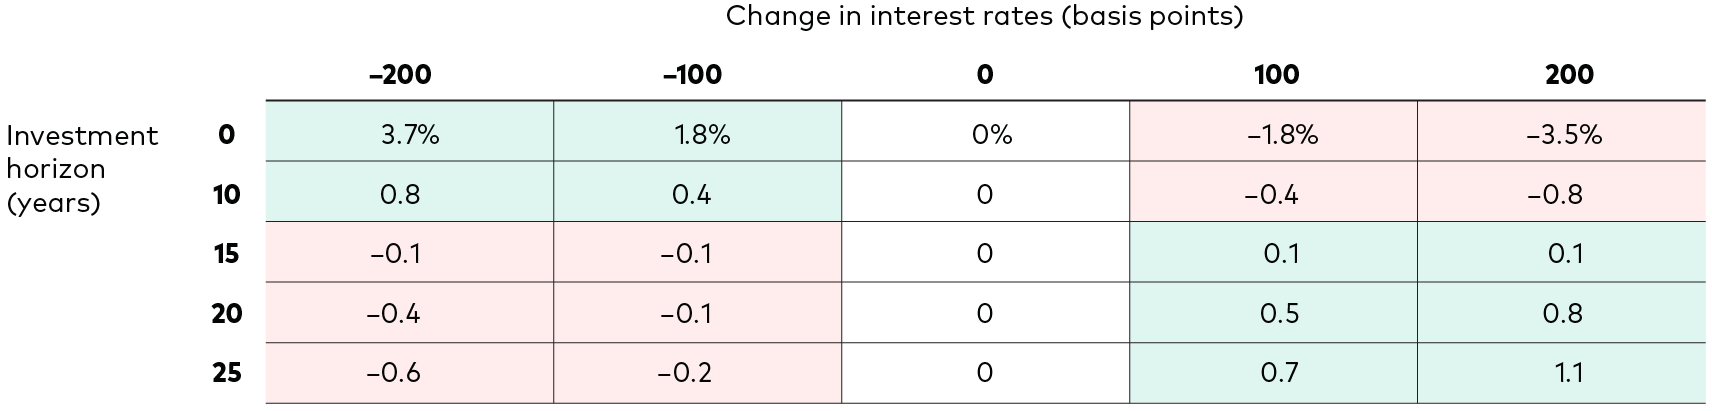 A table shows changes in investment horizons of 5, 10, 15, 20, and 25 years and changes in interest rates of ‒200, ‒100, 0, 100, and 200 basis points for the hypothetical investment. When the investment horizon is 5 or 10 years and interest rates decline by 200 or 100 basis points, the expected change in the annualized total return for the hypothetical investment is positive. It is also positive when the investment horizon is 15, 20, or 25 years and interest rates increase by 100 or 200 basis points. However, when the investment horizon is 5 or 10 years and interest rates increase by 100 or 200 basis points, the expected change in the annualized total return for the hypothetical investment is negative. It is also negative when the investment horizon is 15, 20, or 25 years and interest rates decrease by 100 or 200 basis points. For all investment horizons, no change in interest rates results in no expected change in the annualized total return for the hypothetical investment. 